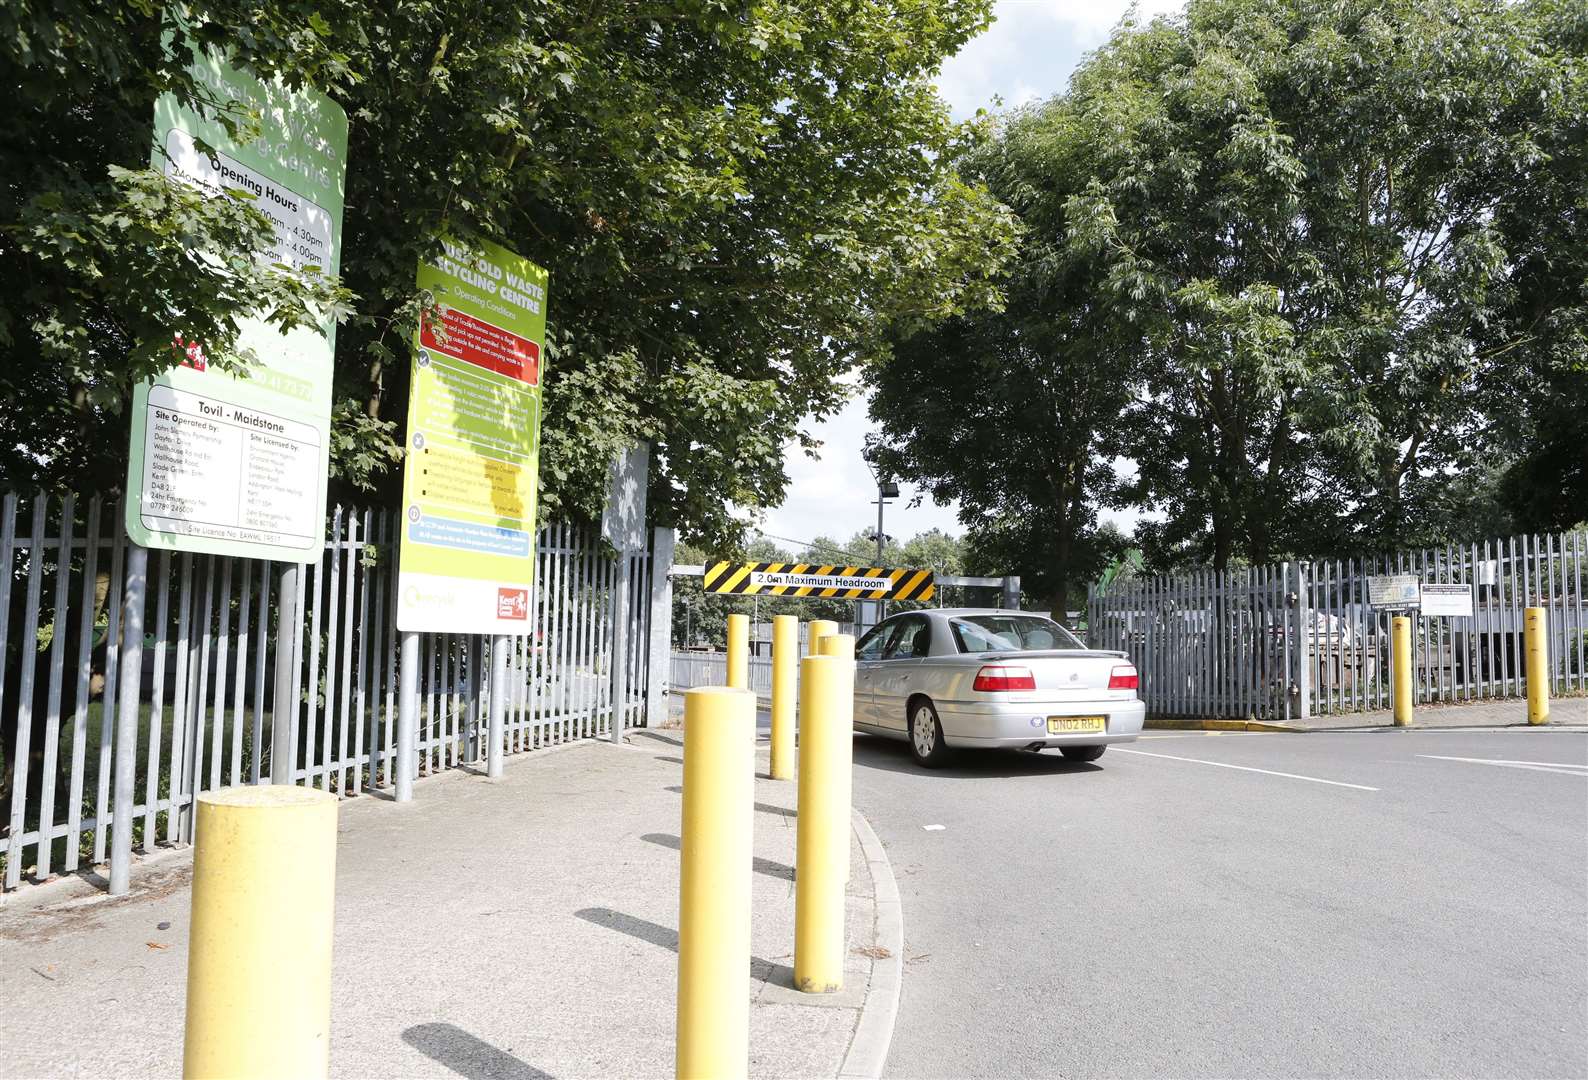 The Tovil Recycling Centre in Burial Ground Lane